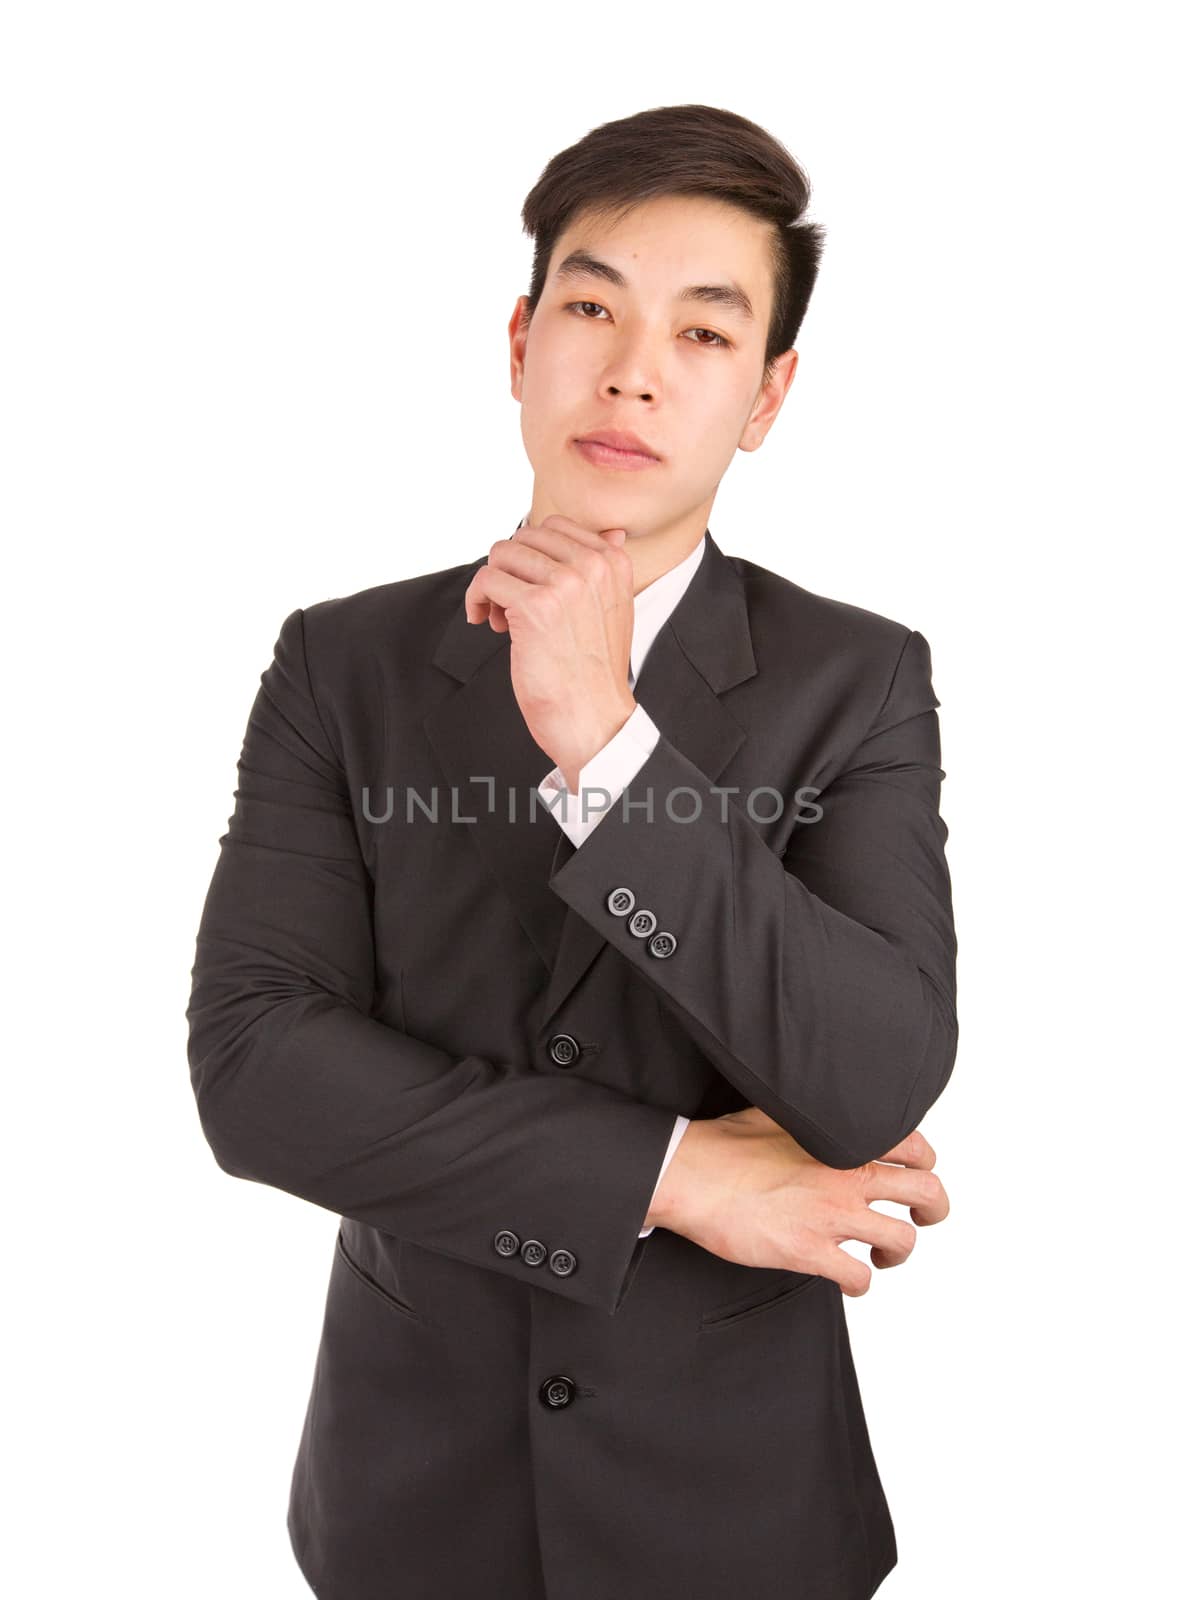 Young Businessman smart portrait looking at camera isolated on w by jayzynism